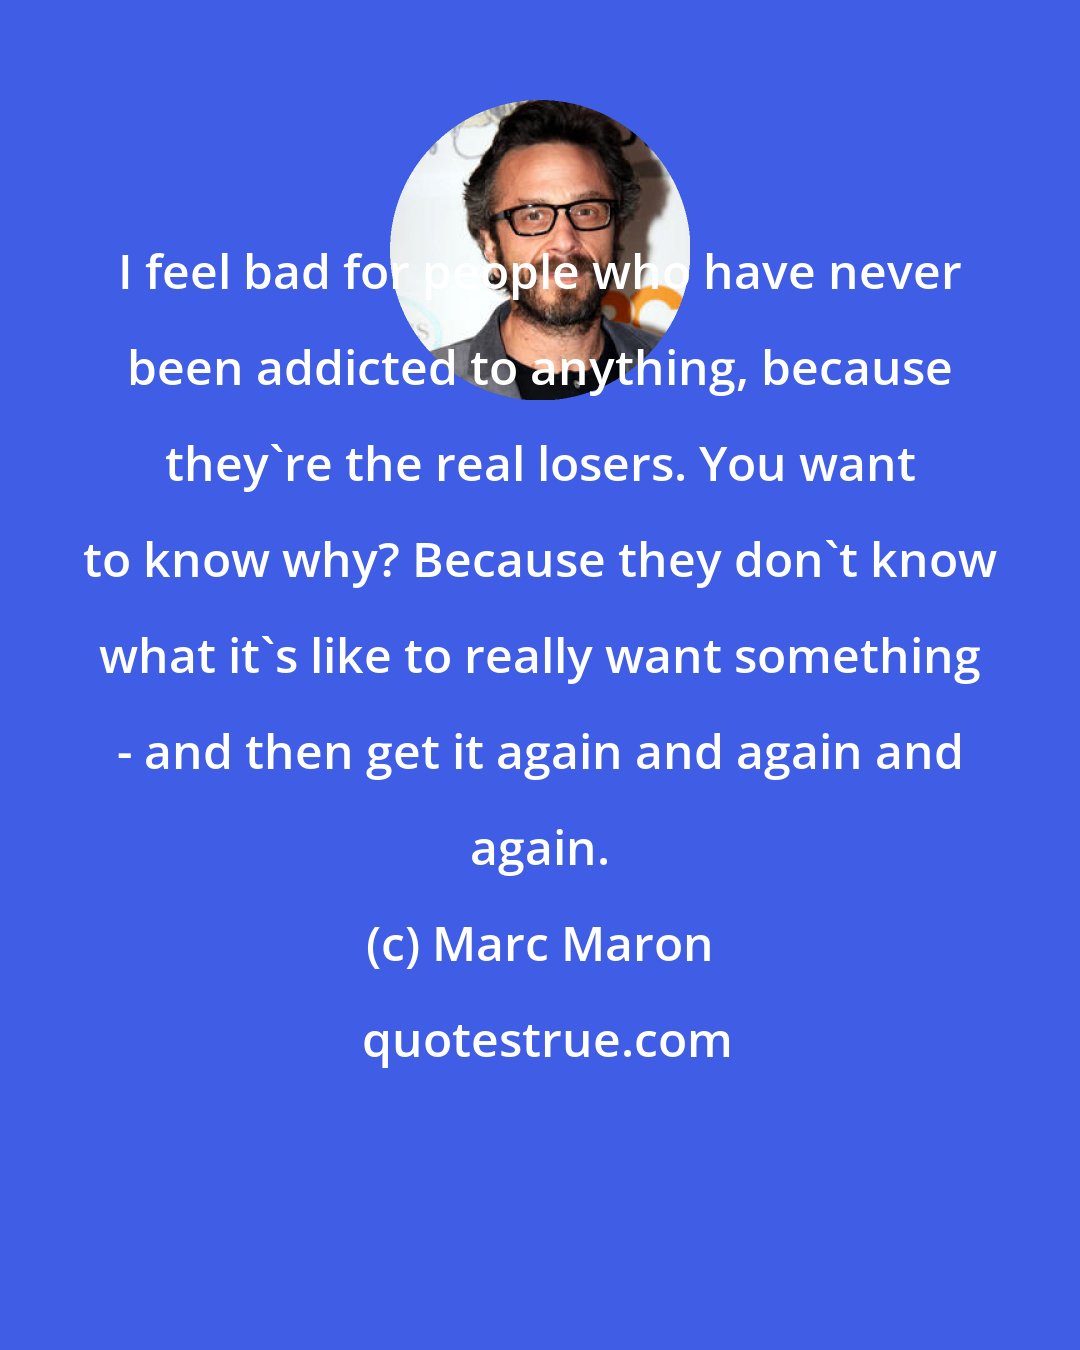 Marc Maron: I feel bad for people who have never been addicted to anything, because they're the real losers. You want to know why? Because they don't know what it's like to really want something - and then get it again and again and again.